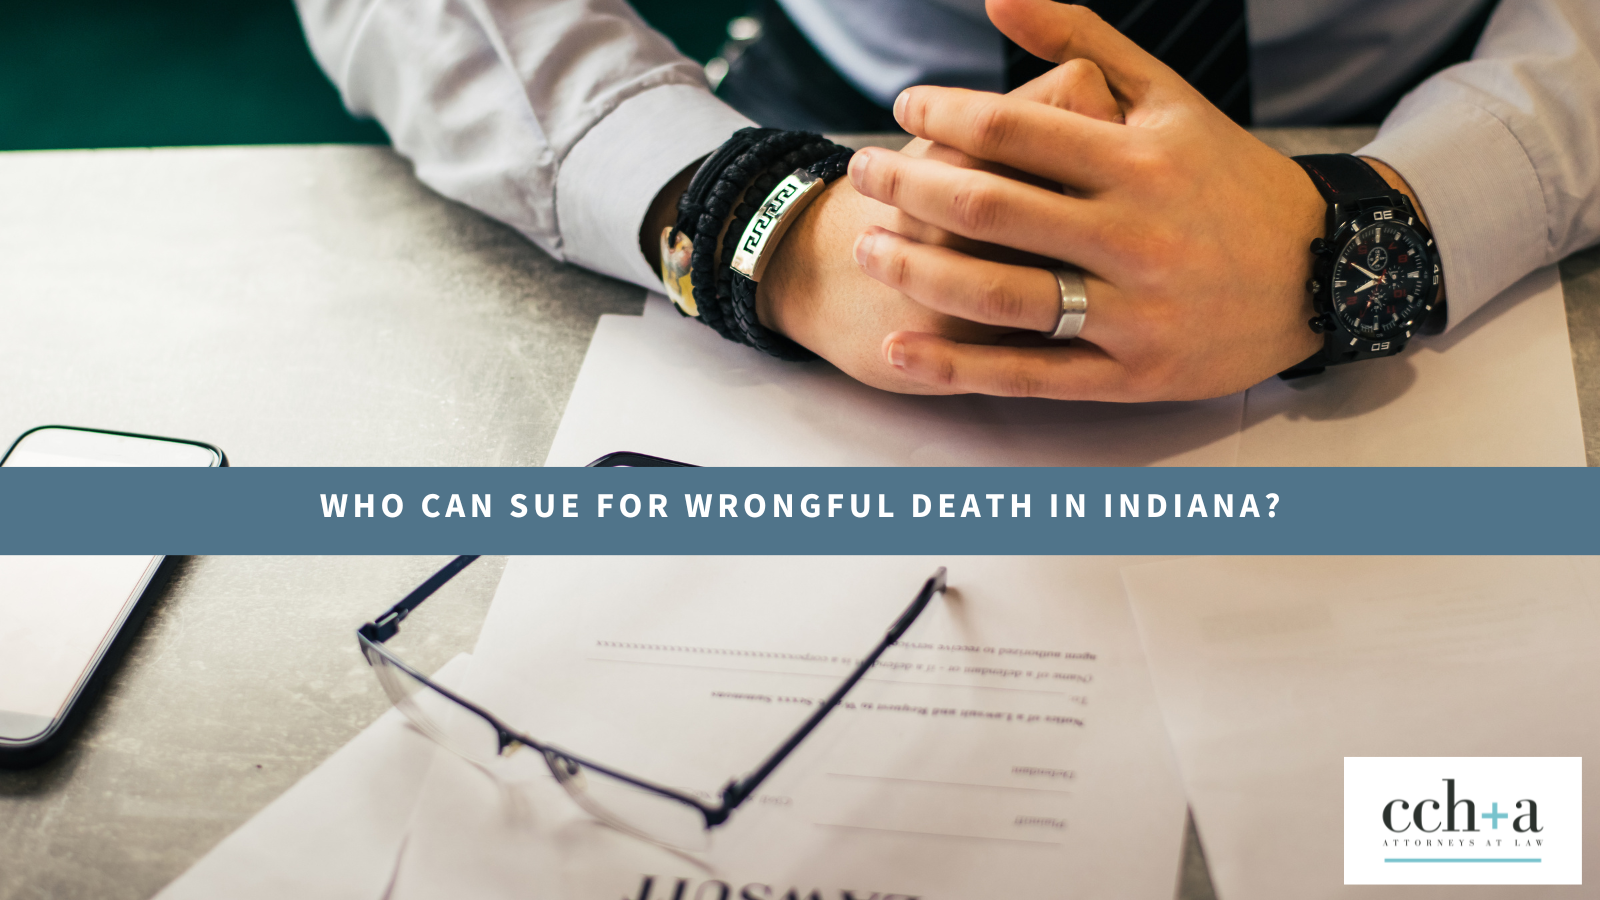 Image of wrongful death attorney and paperwork